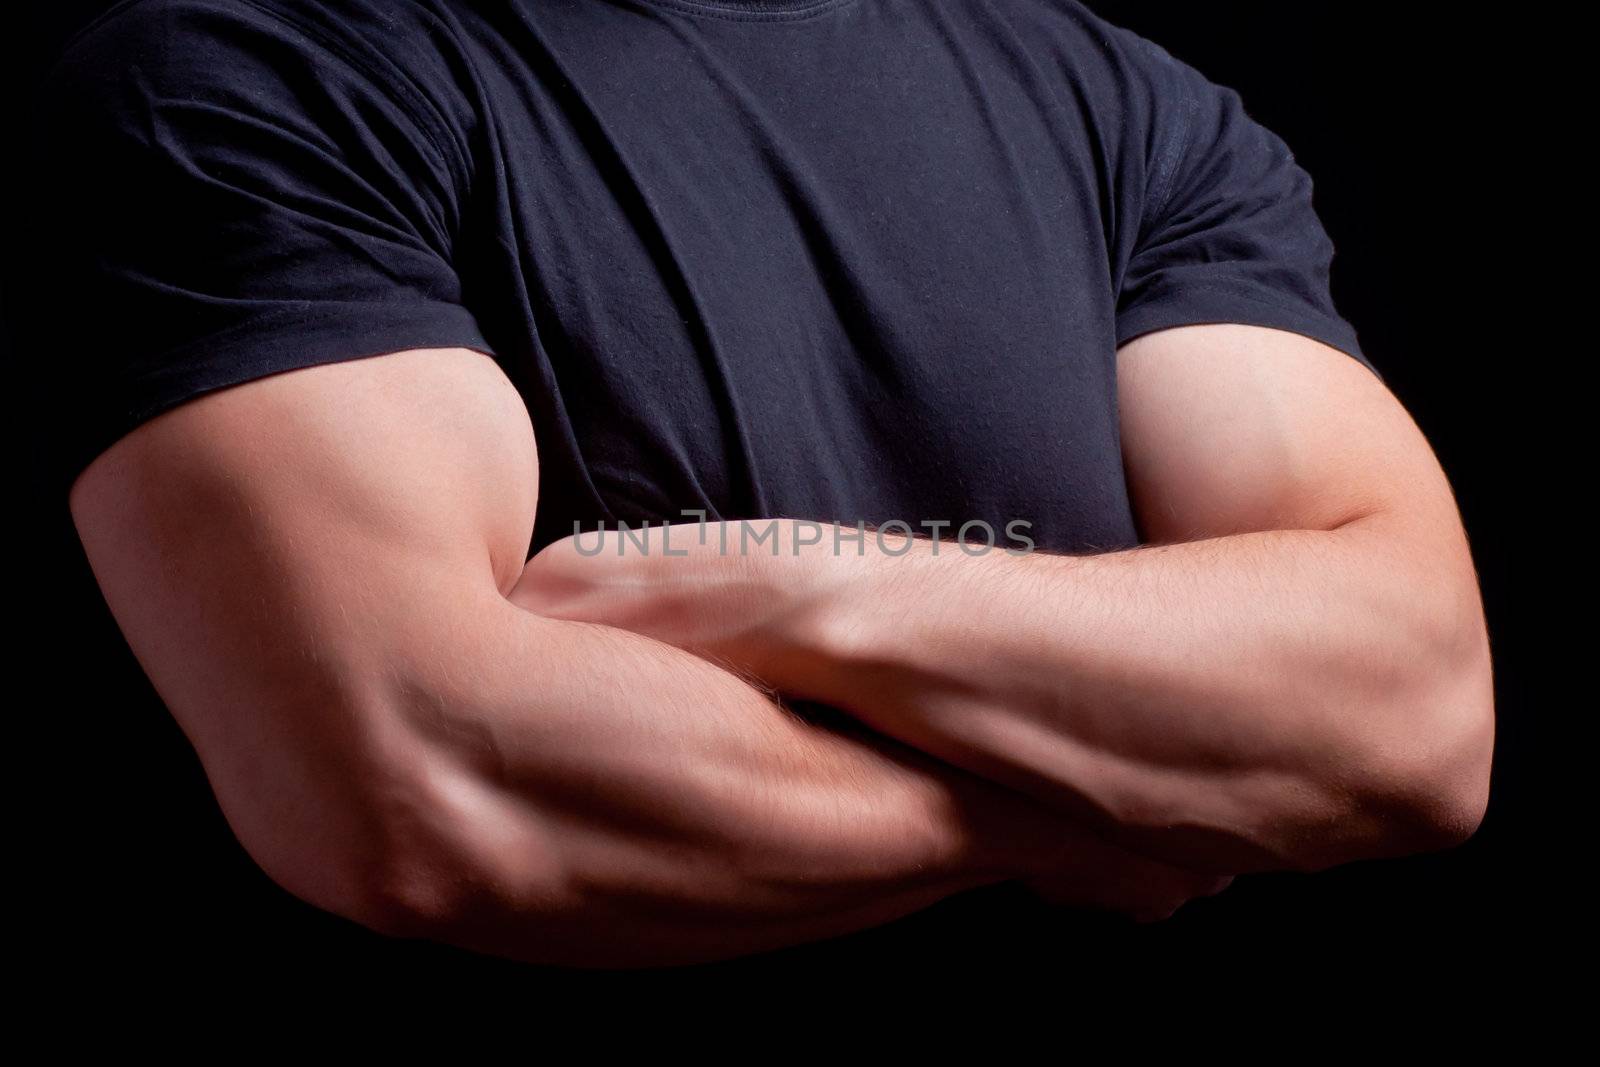 Male security guard with strong arms crossed in a dark background